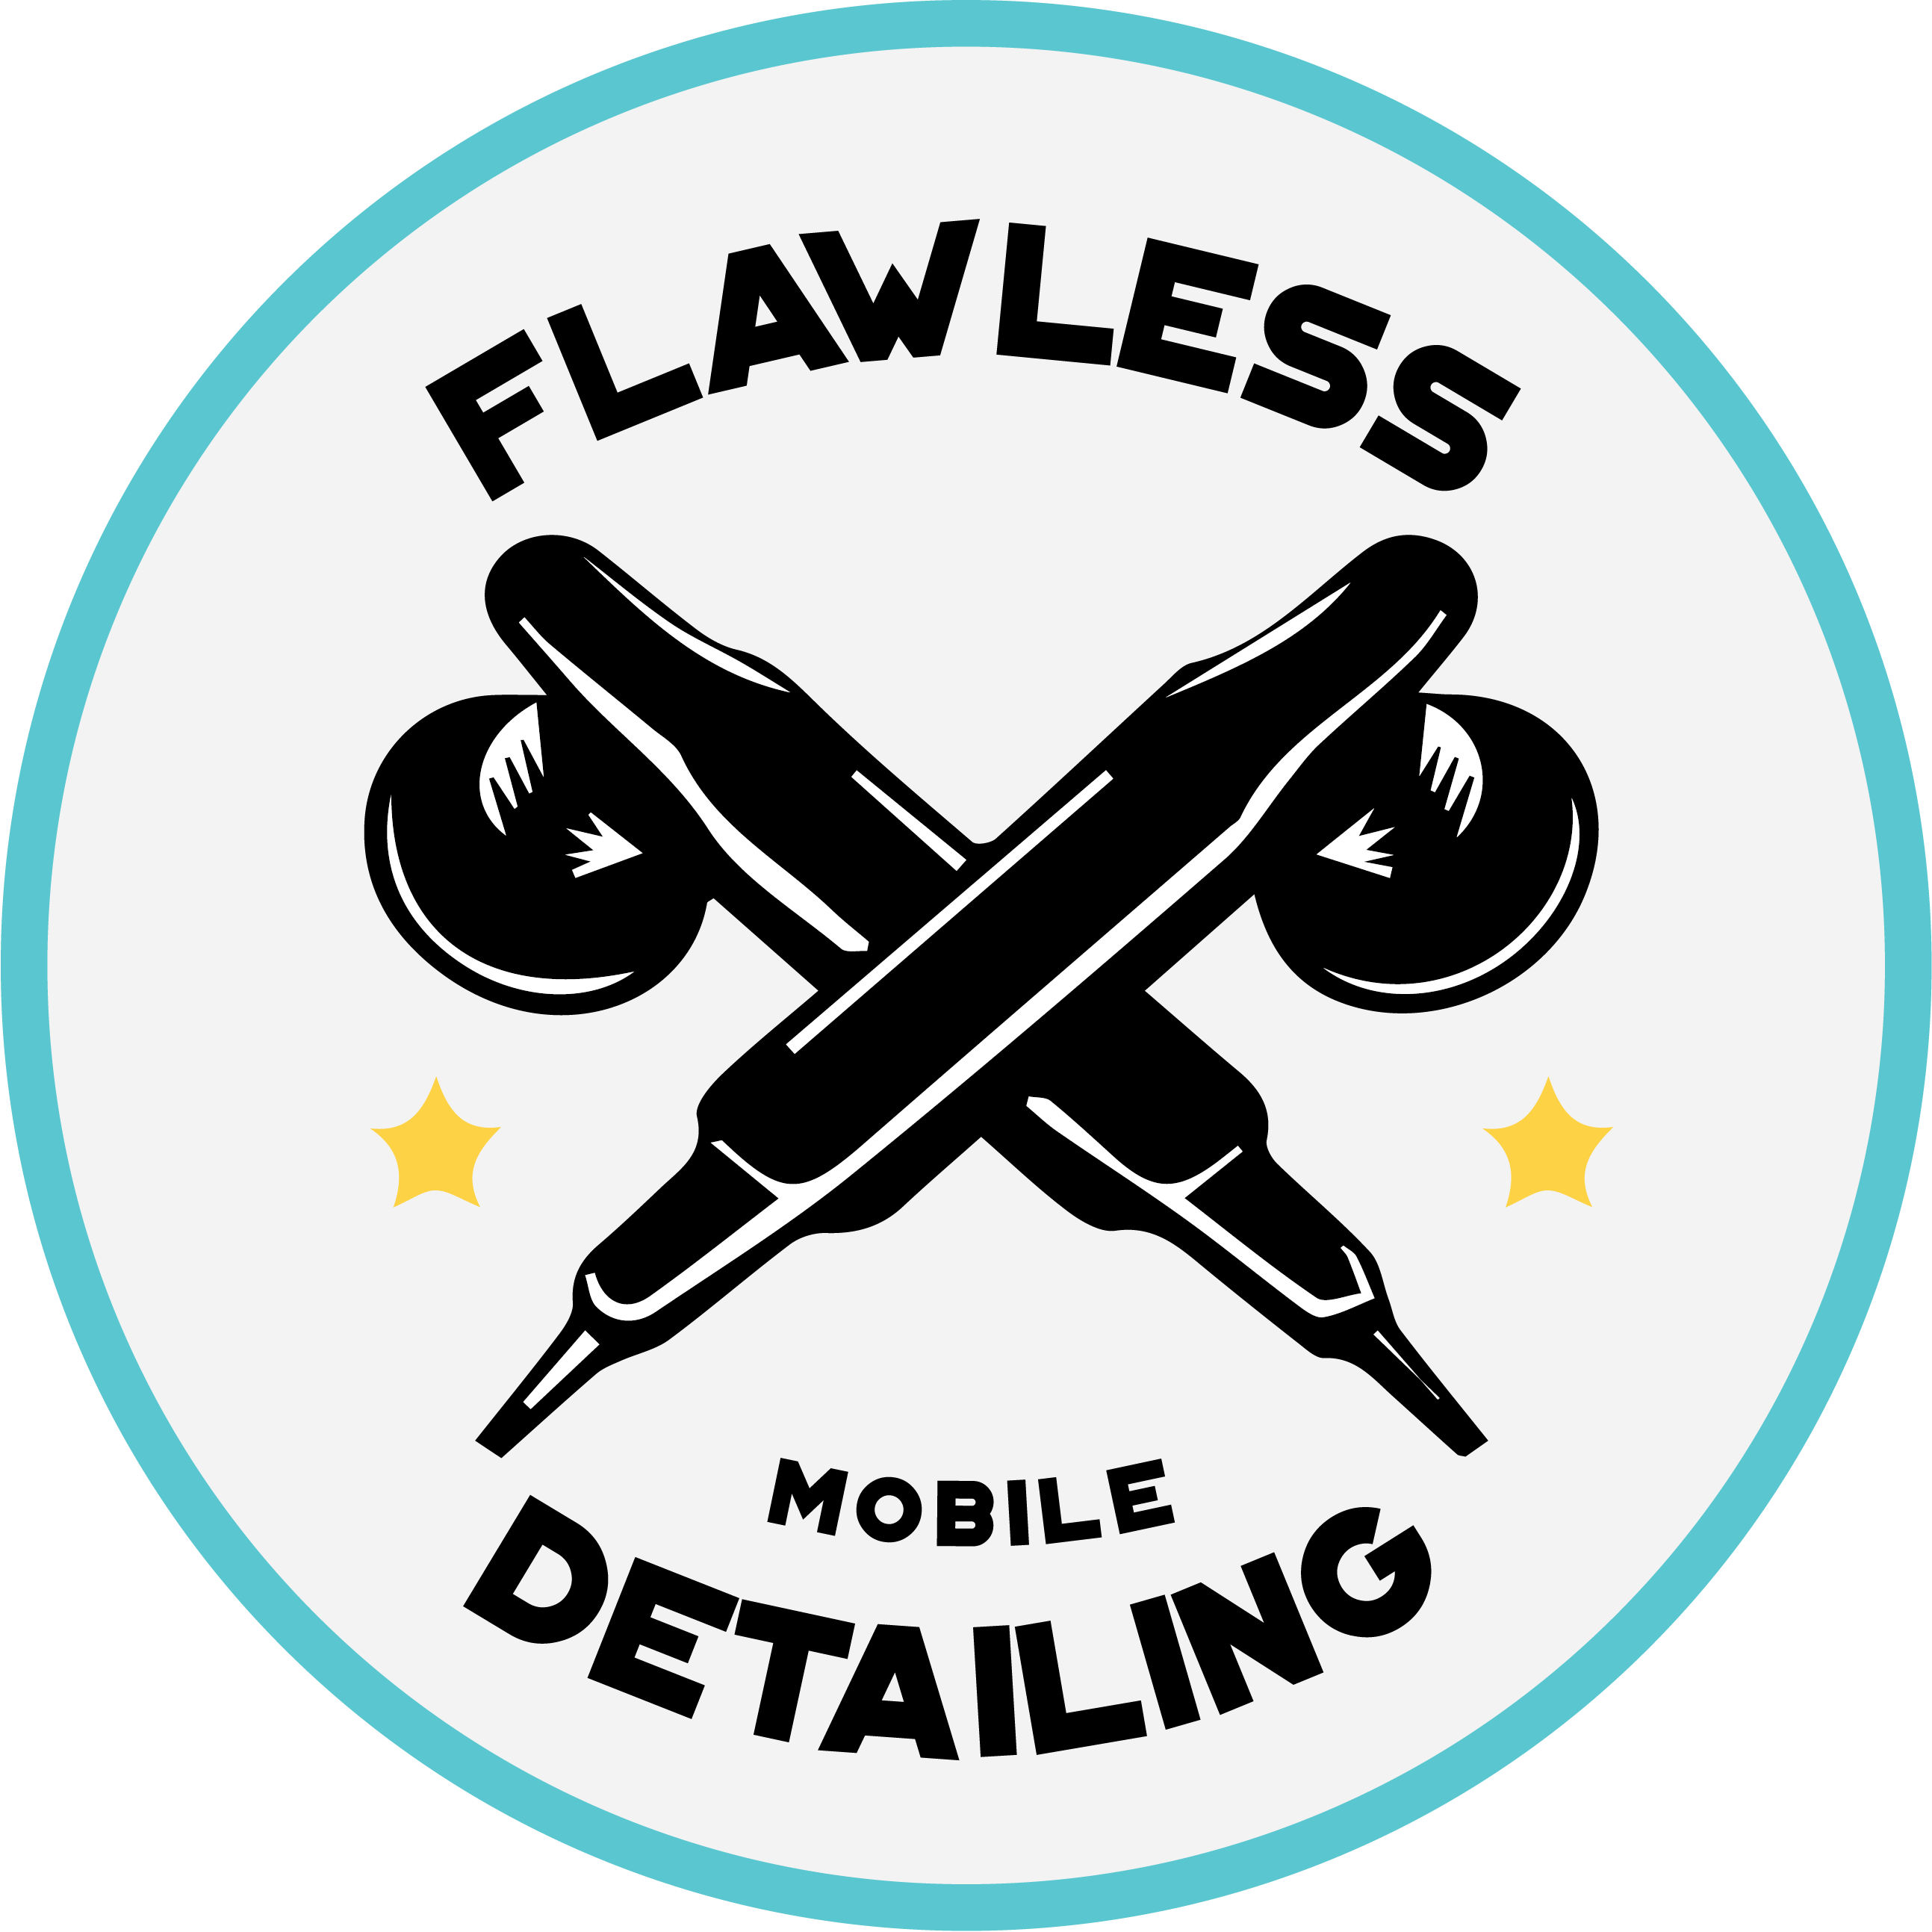 Flawless Mobile Detailing | Mobile Detailing | Detailing Services